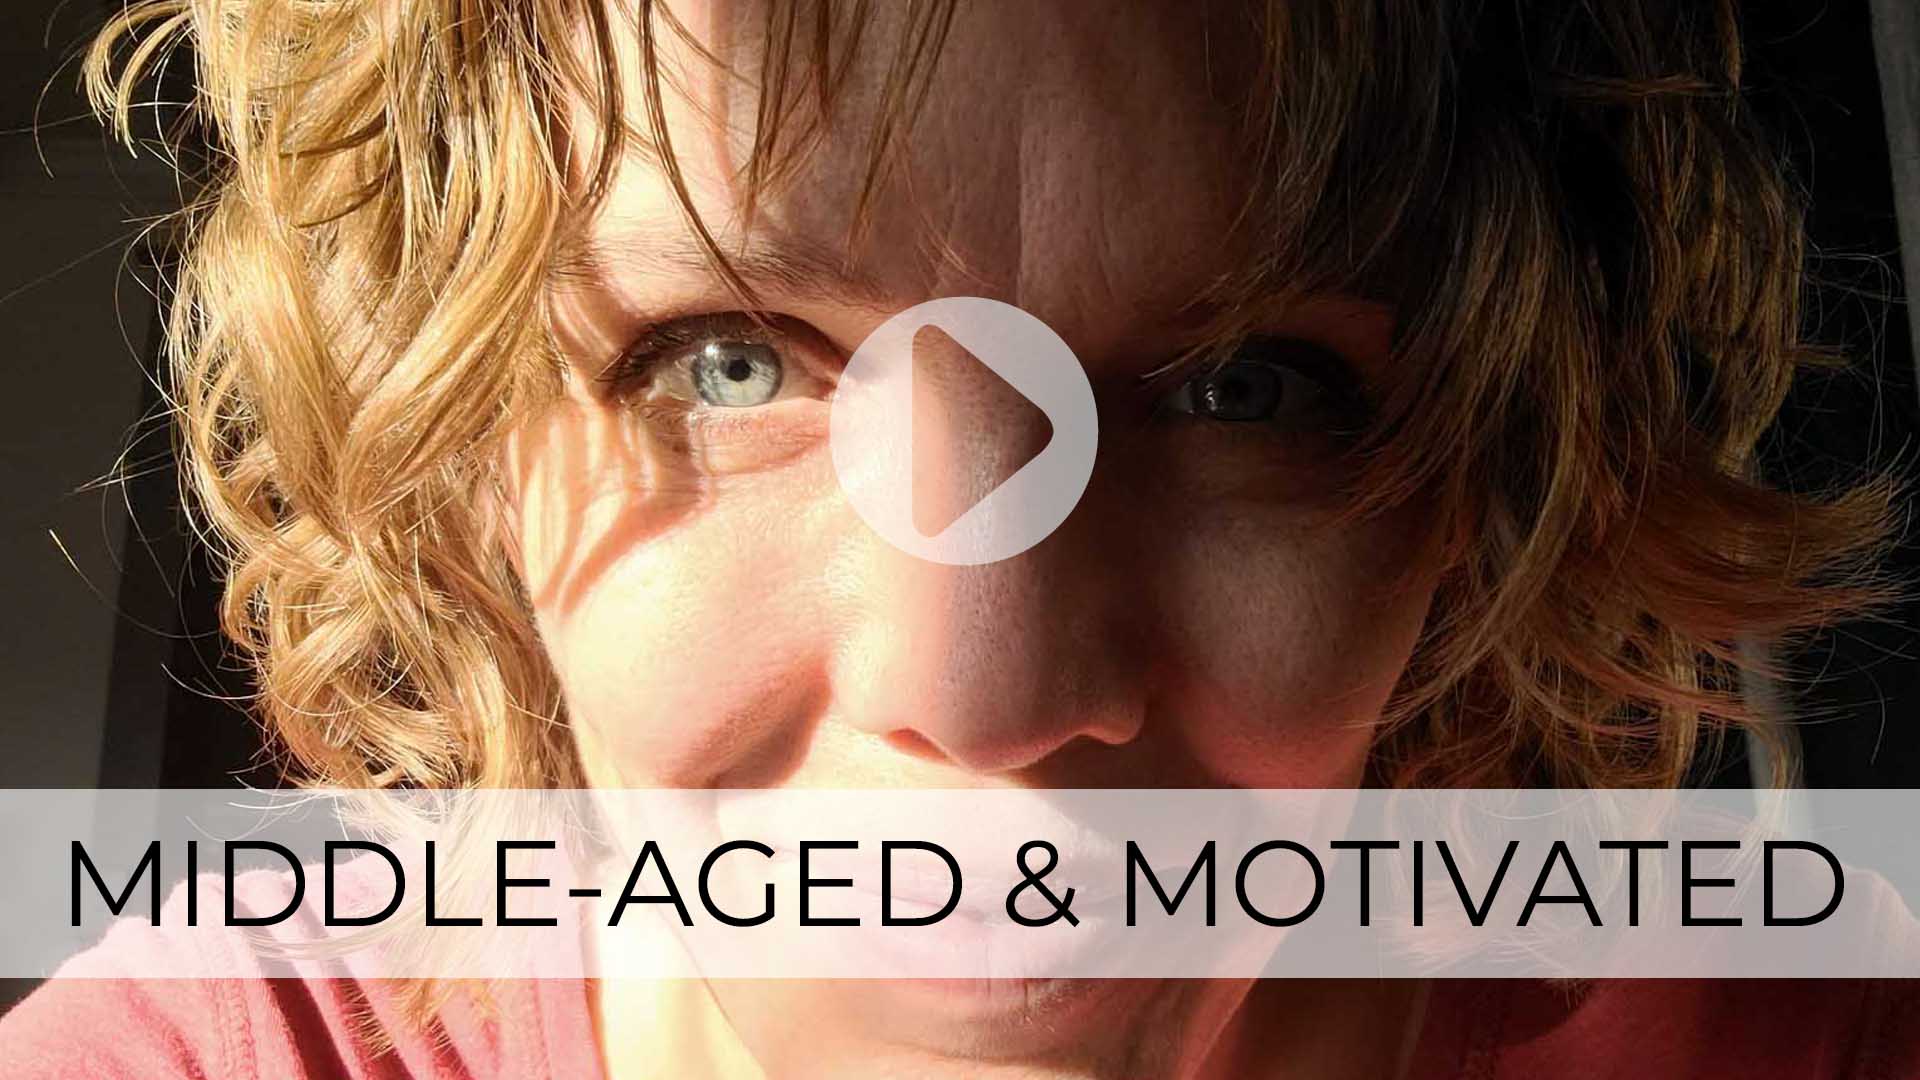 Larissa of Prodigal Pieces on being middle-aged and motivated for change | prodigalpieces.com #prodigalpieces